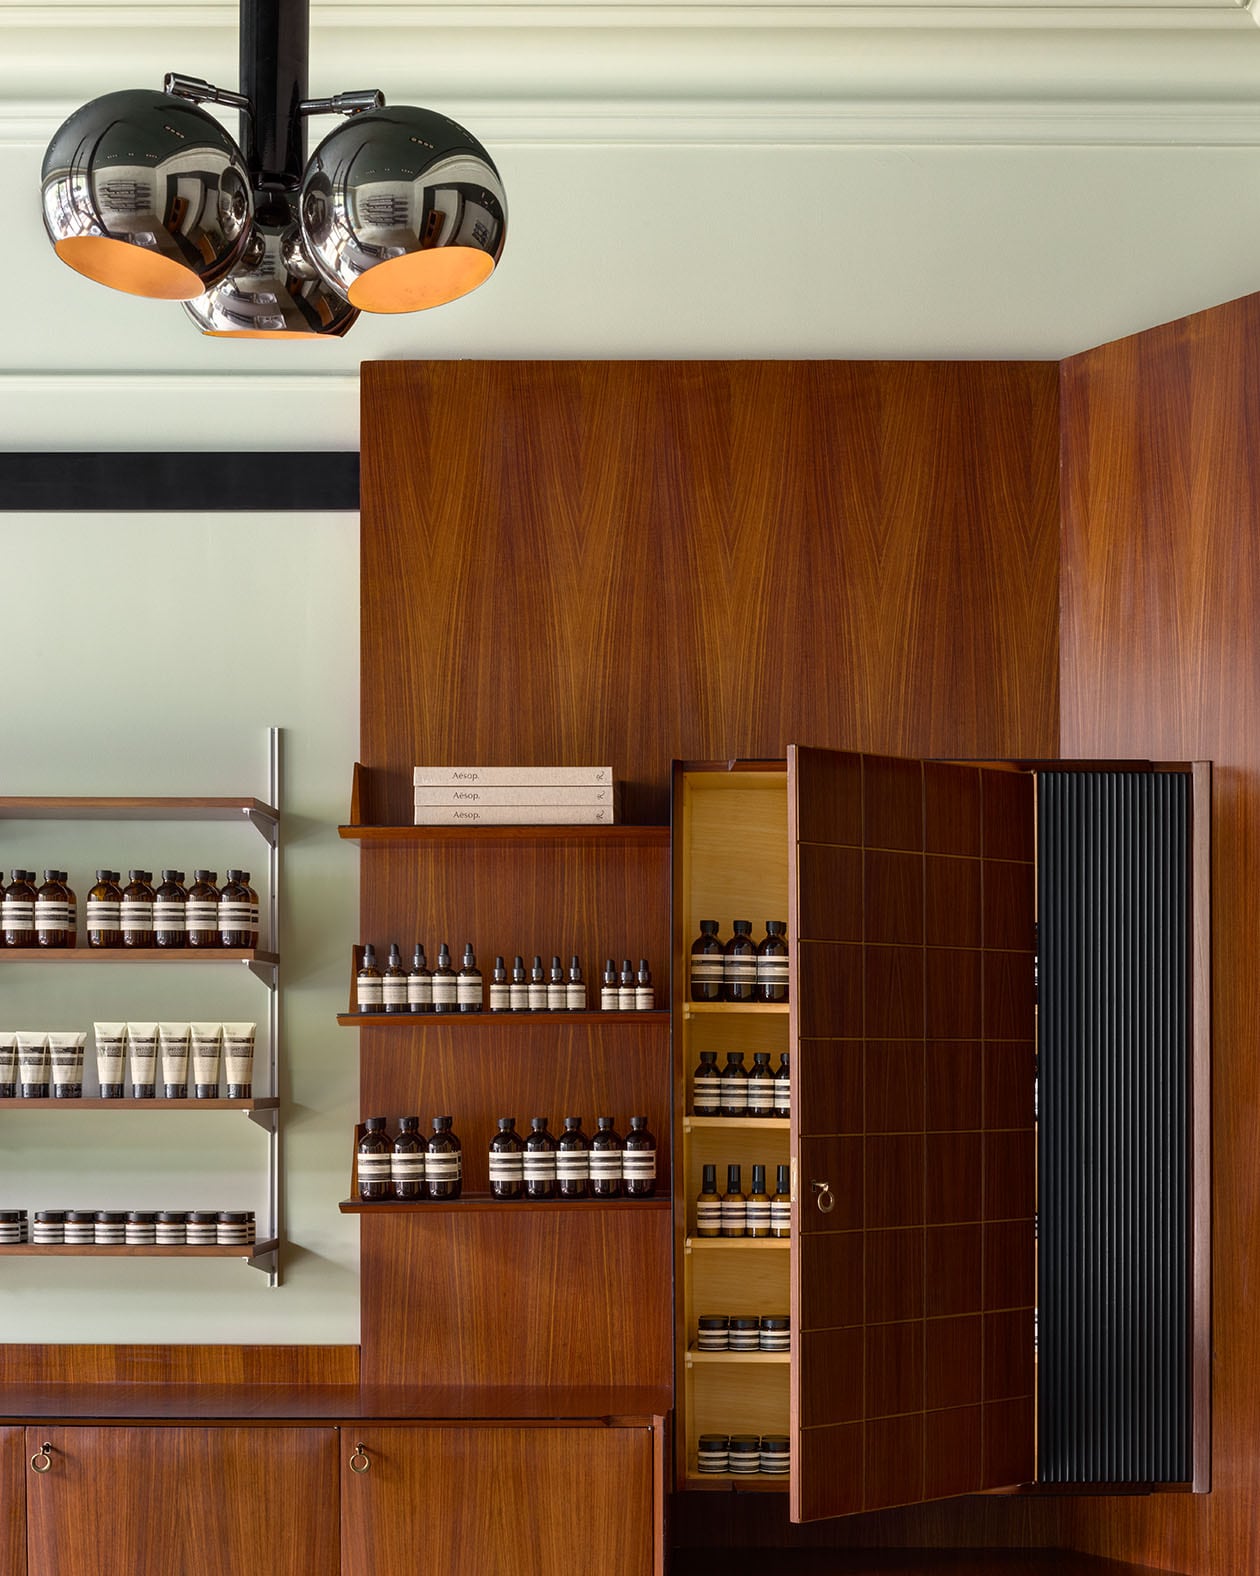 Aesop Madison Avenue store interior featuring wood paneling walls and product shelves